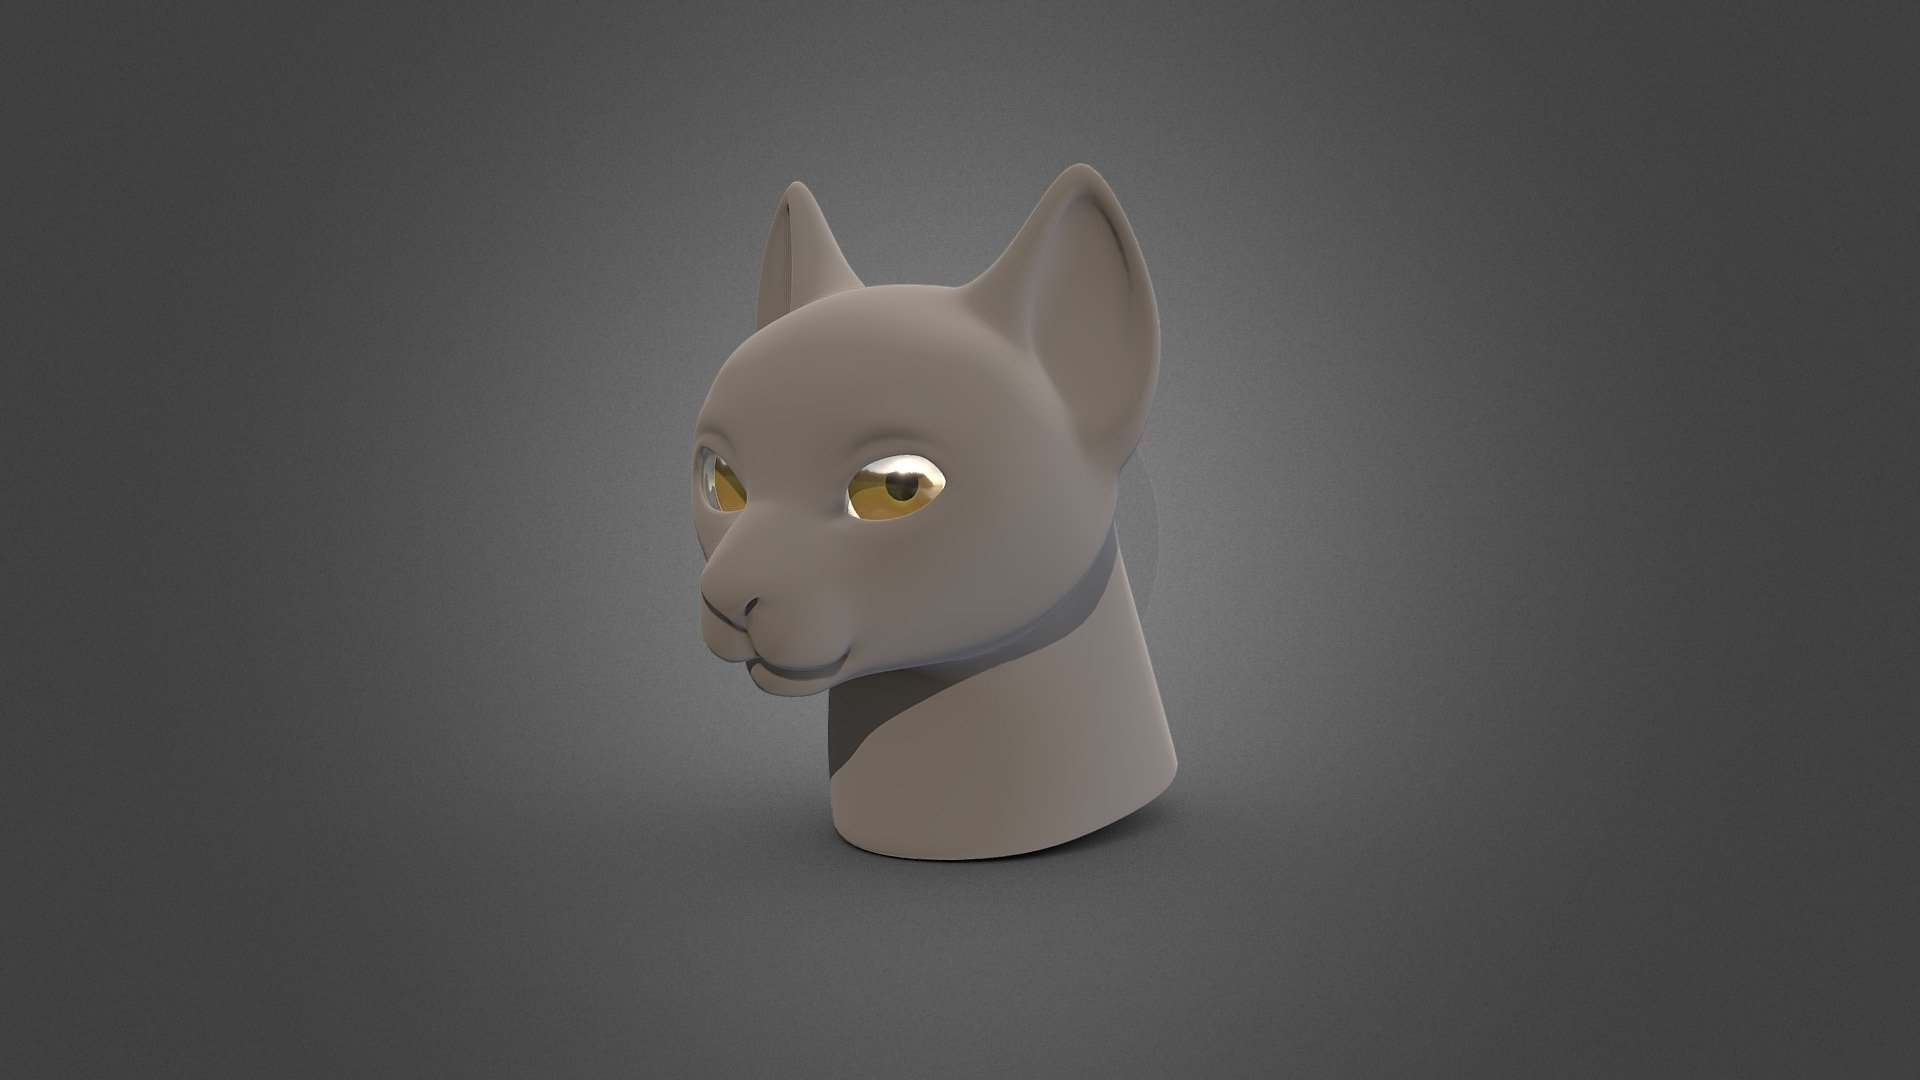 Haven't posted here in a while! Focusing on improving my topology, so I've been modeling quite a few kitties lately. This is one of my neater attempts, so thought I'd post this up here for free download! - Cat Head (February 6) - Download Free 3D model by Lilly! (@LillyanneTr) 3d model